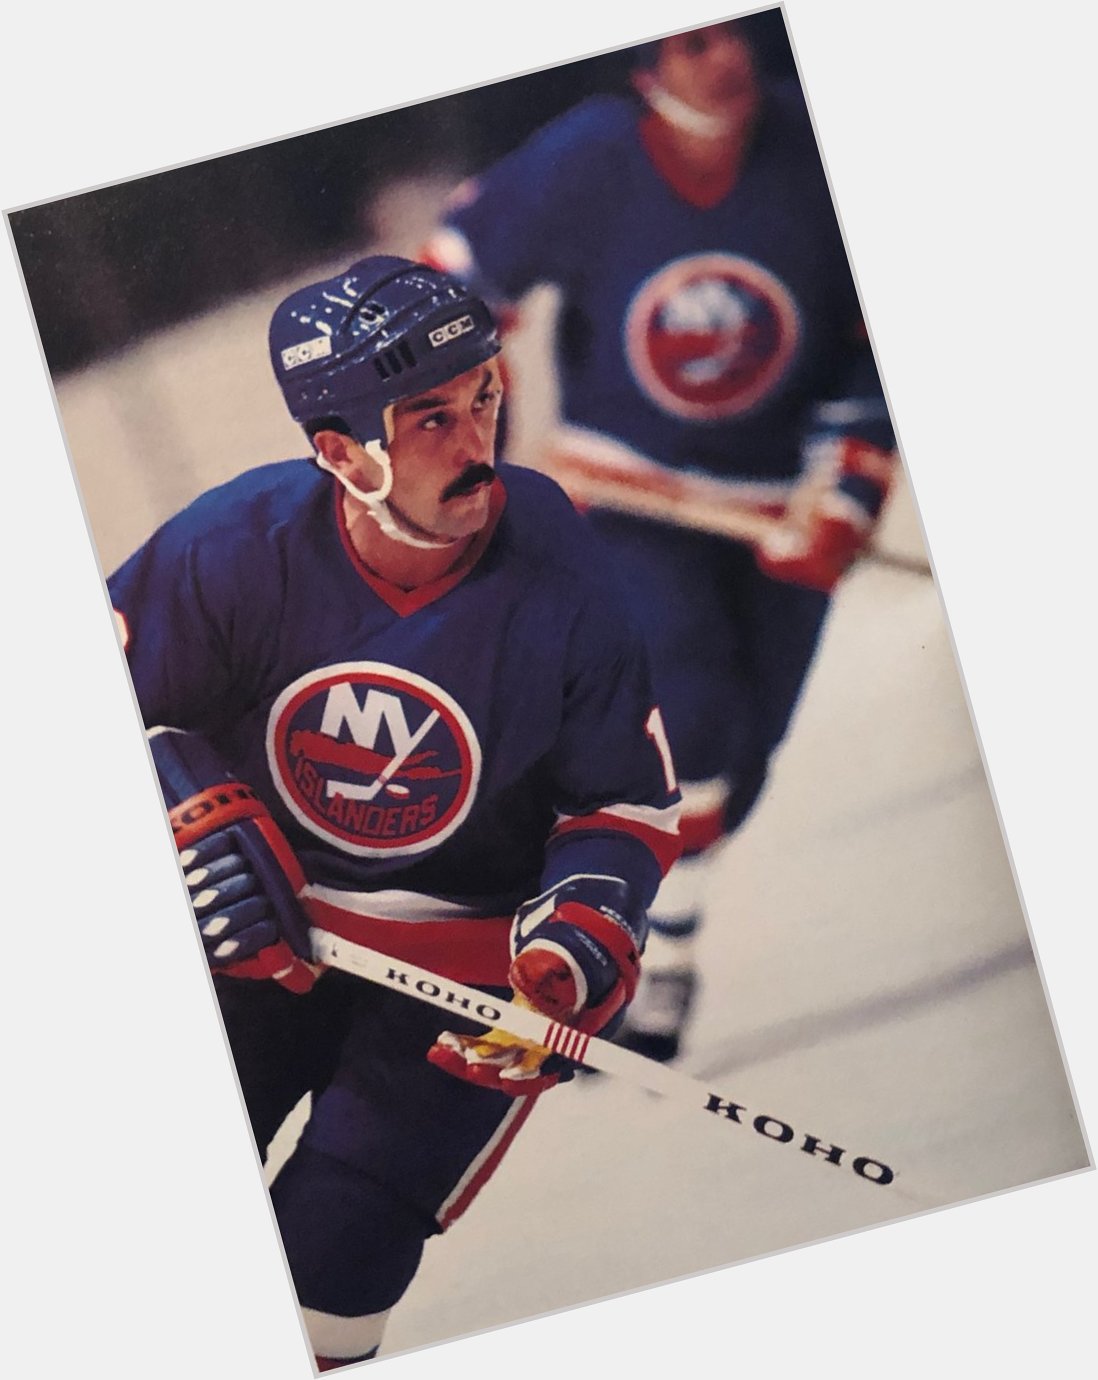 Happy Birthday to 7x Stanley Cup Champion and Hockey Hall of Famer Bryan Trottier! 